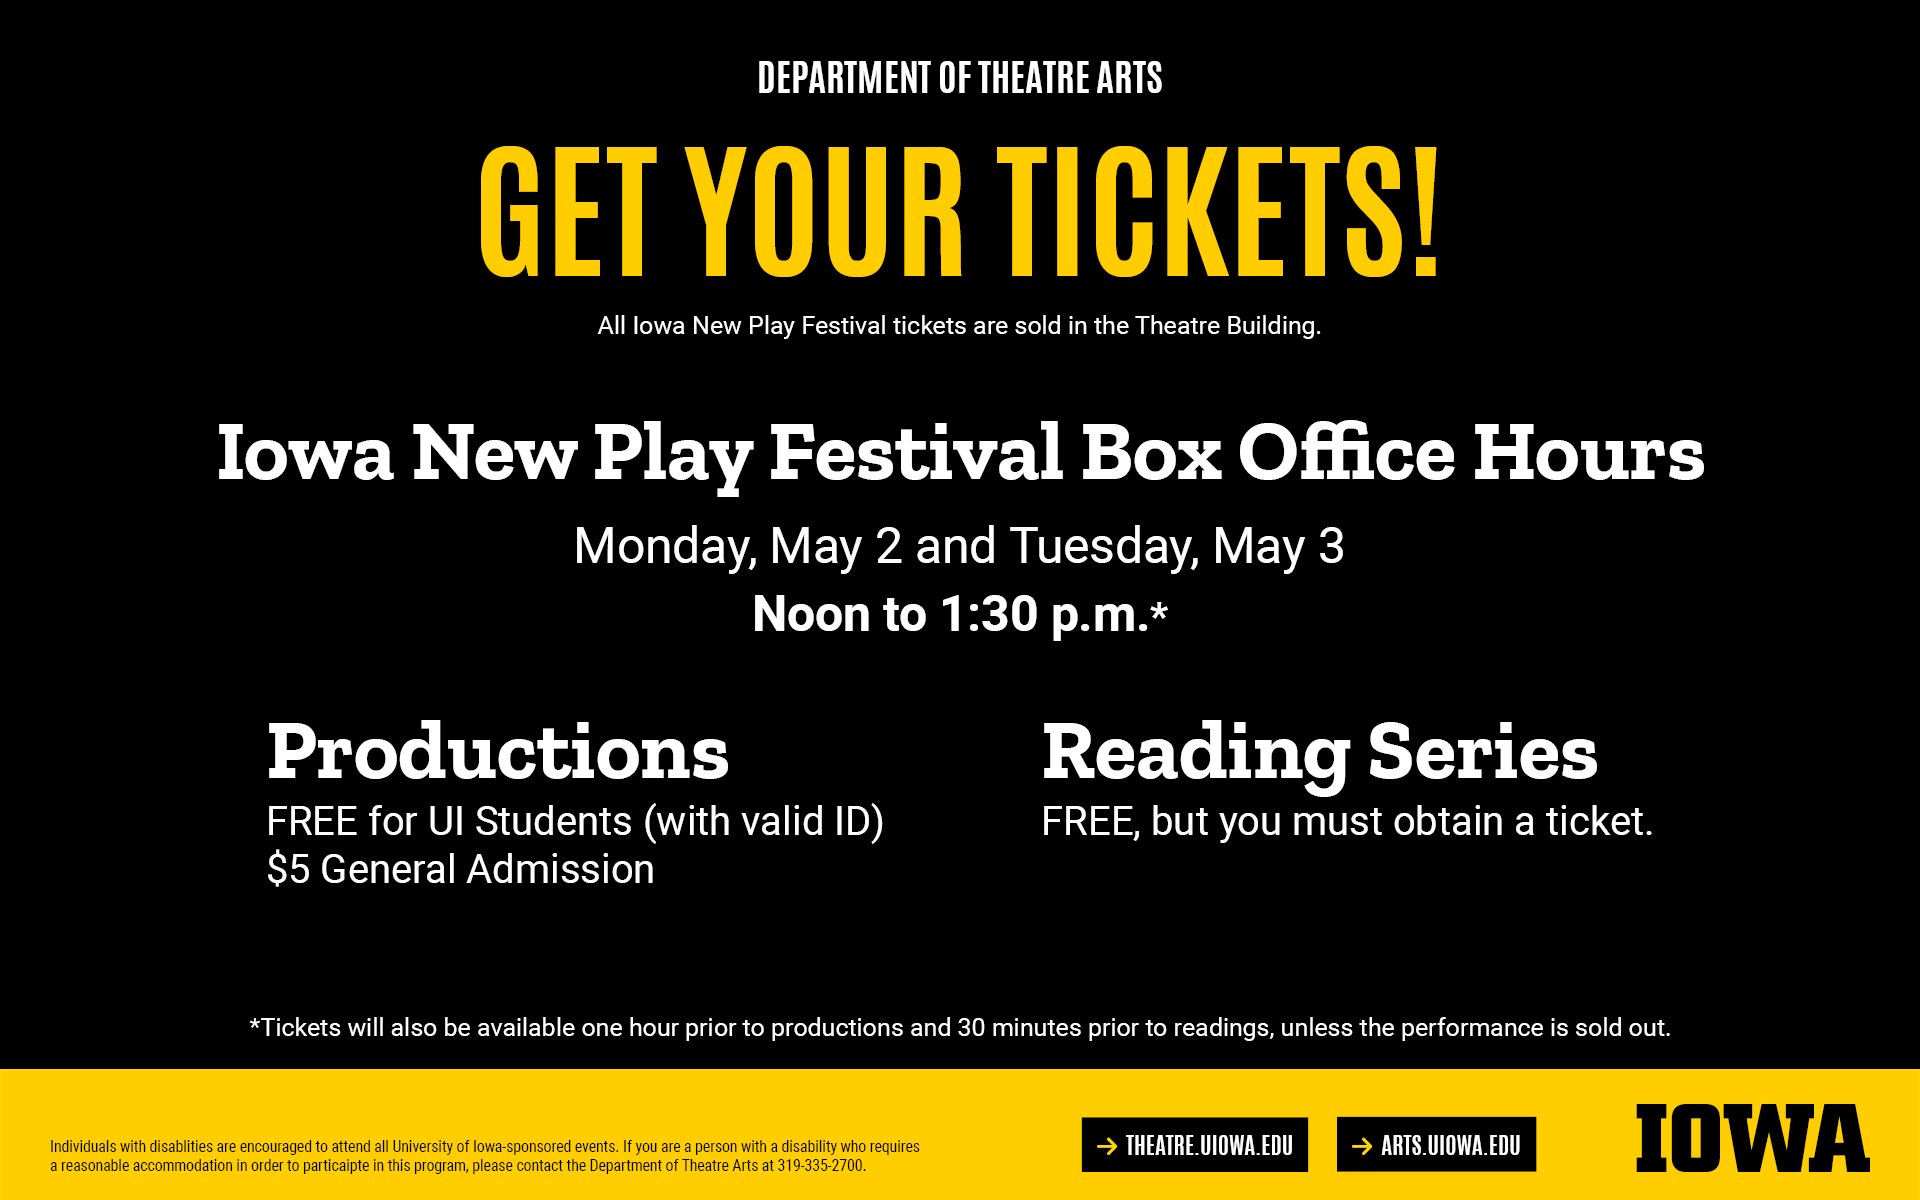 Get Your Tickets! All festival tickets are sold in the theatre building. Iowa New Play Festival Box Office Hours: May 2 and 3, noon to 1:30PM. Productions: Free for UI students, $5 general admission. Reading Series: Free, but you must obtain a ticket. Individuals with disablities are encouraged to attend all University of Iowa-sponsored events. If you are a person with a disability who requires  a reasonable accommodation in order to particaipte in this program, please contact the Department of Theatre Arts at 319-335-2700.